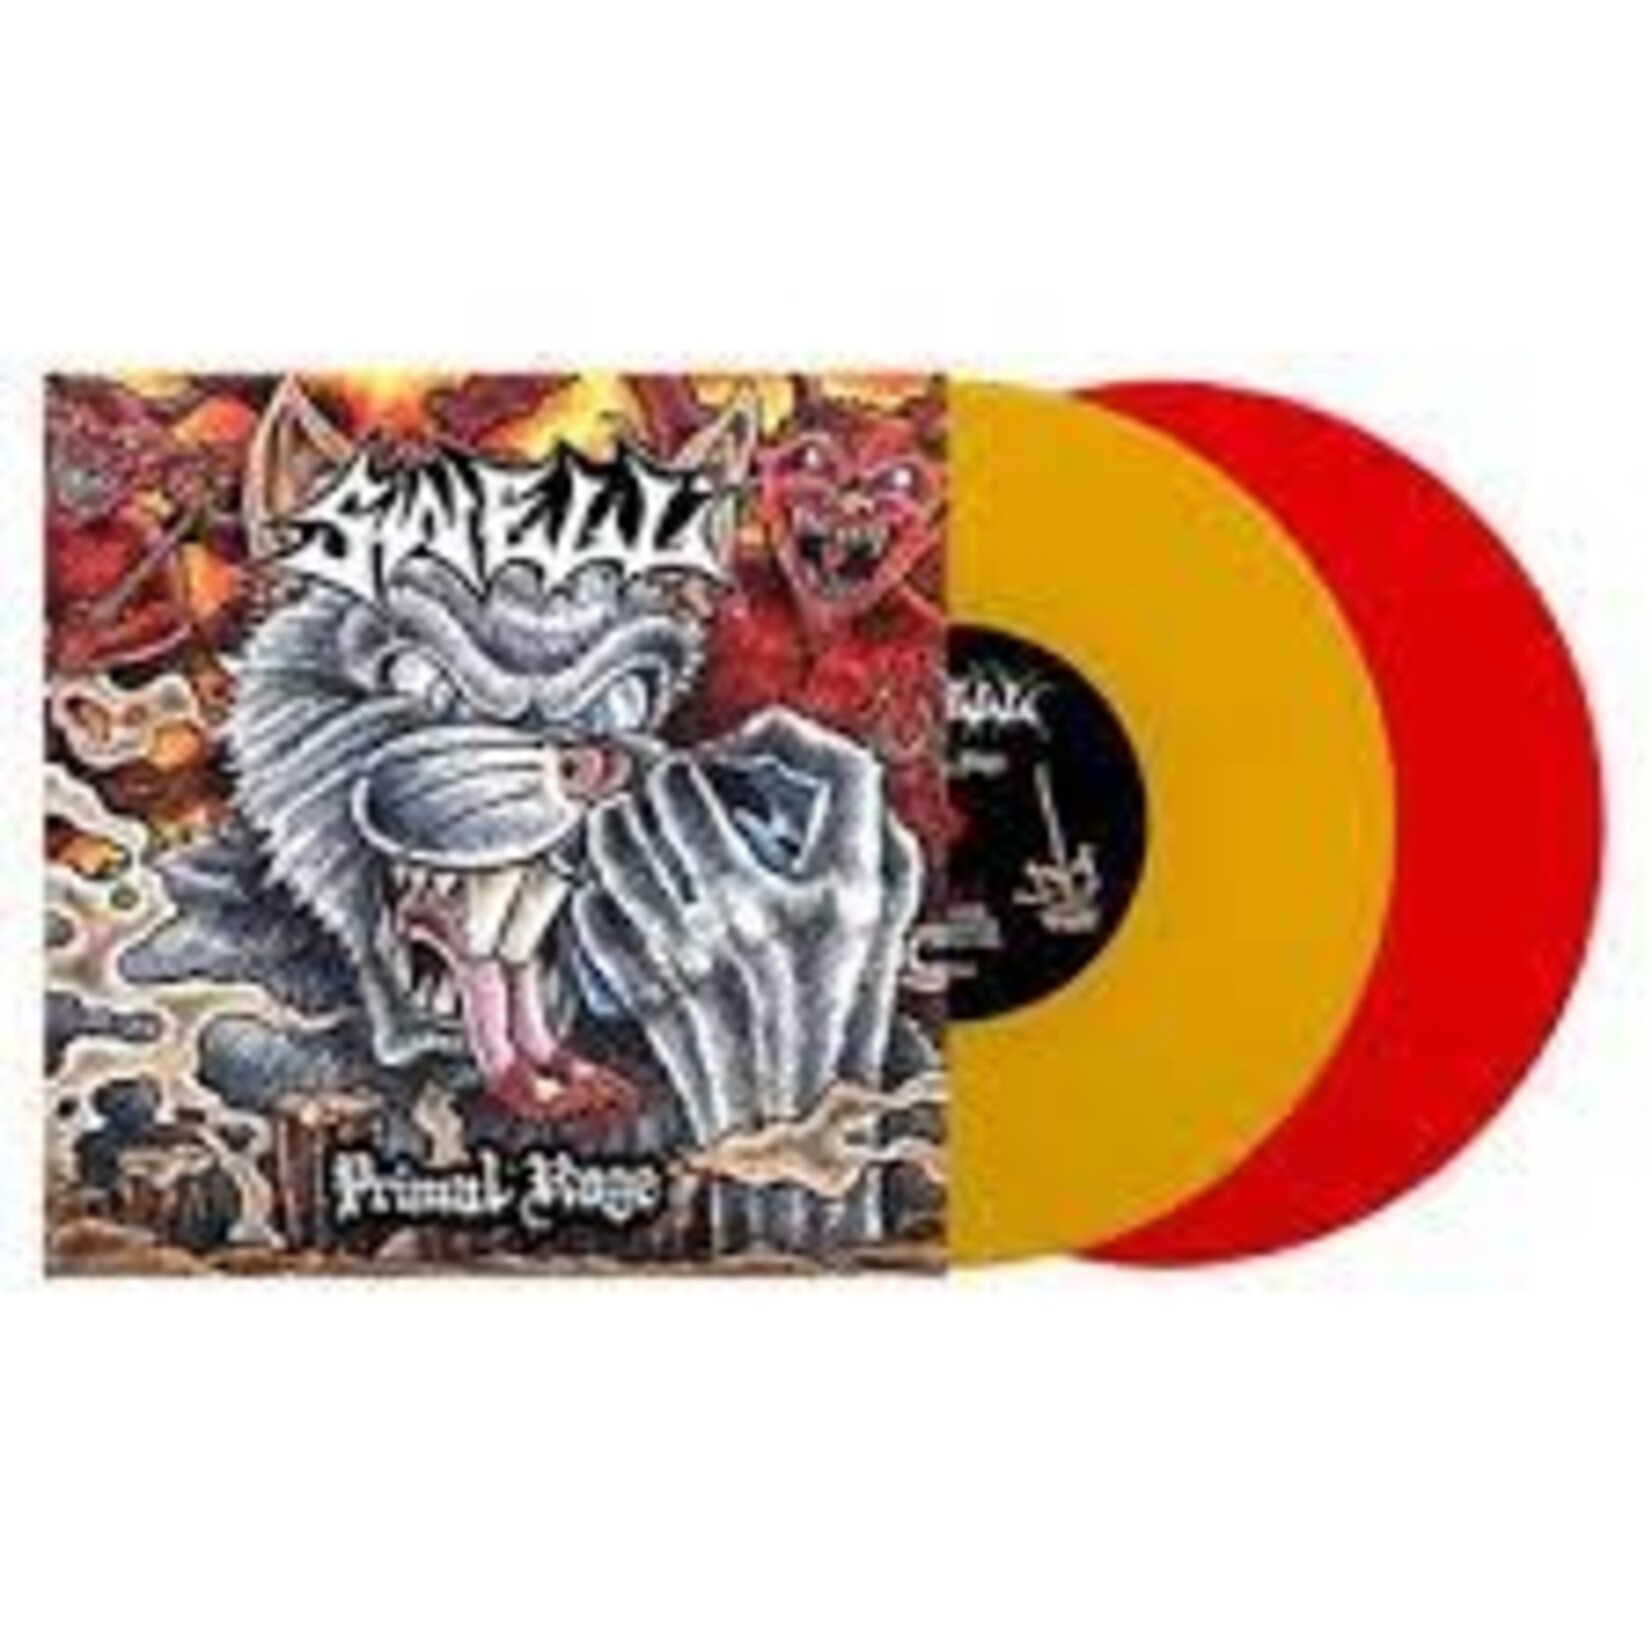 SWELL - PRIMAL RAGE 7" (RED)